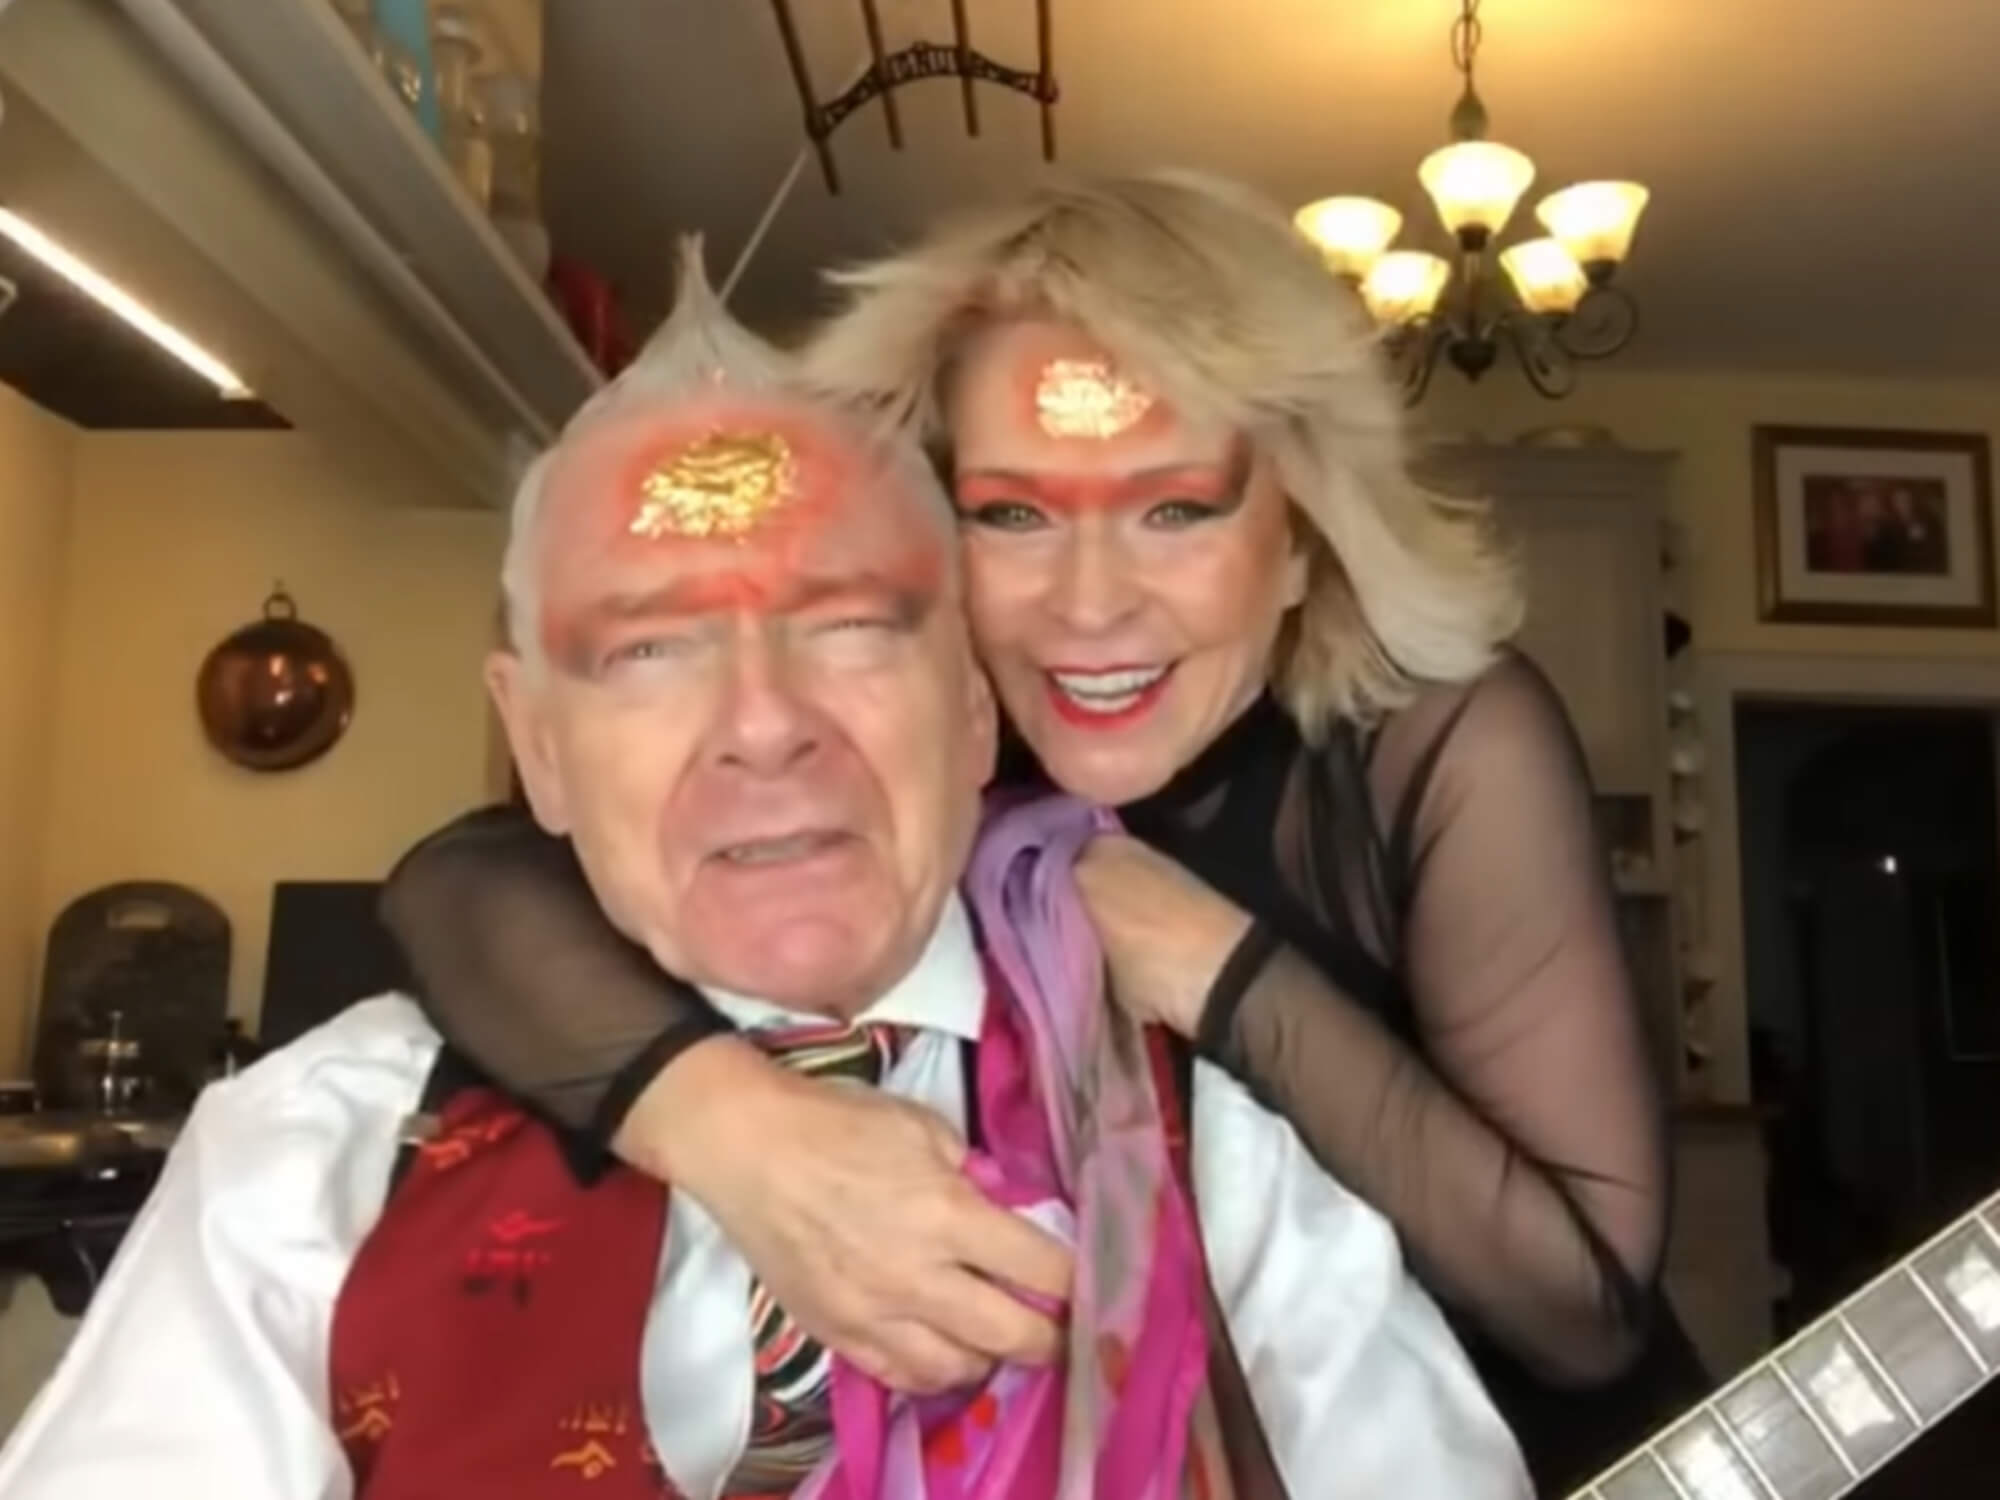 Toyah and Robert Fripp Sunday Lunch The Kids Aren't Alright